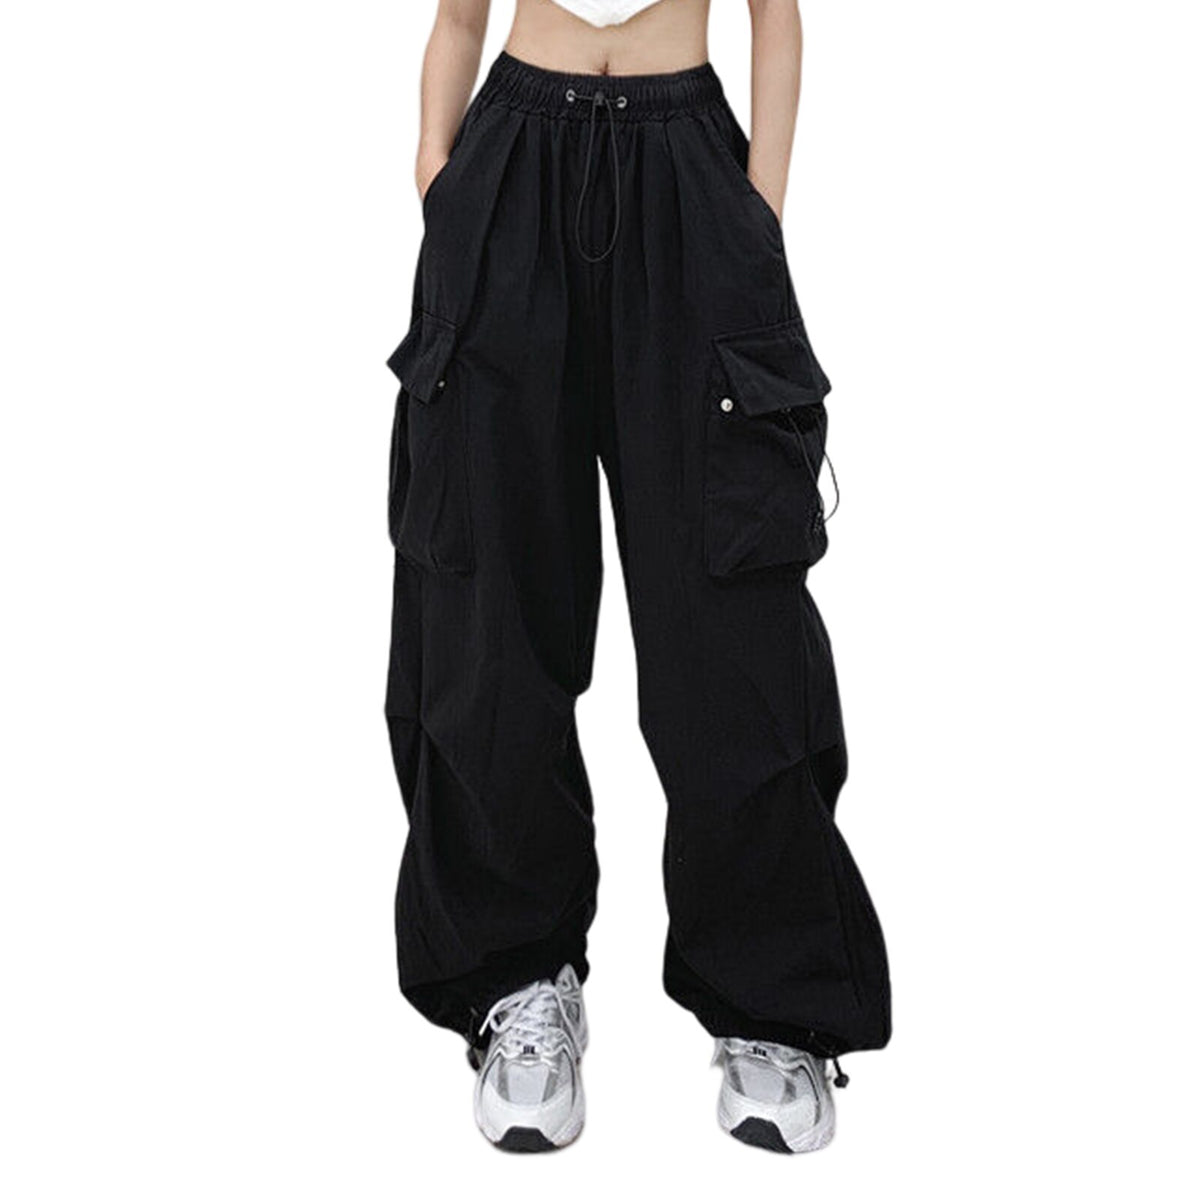 Back to School Women Wide Leg Cargo Pants Y2k Baggy Straight Trousers Elastic Waist with Pockets Solid Color Vintage Streetwear Sweatpants